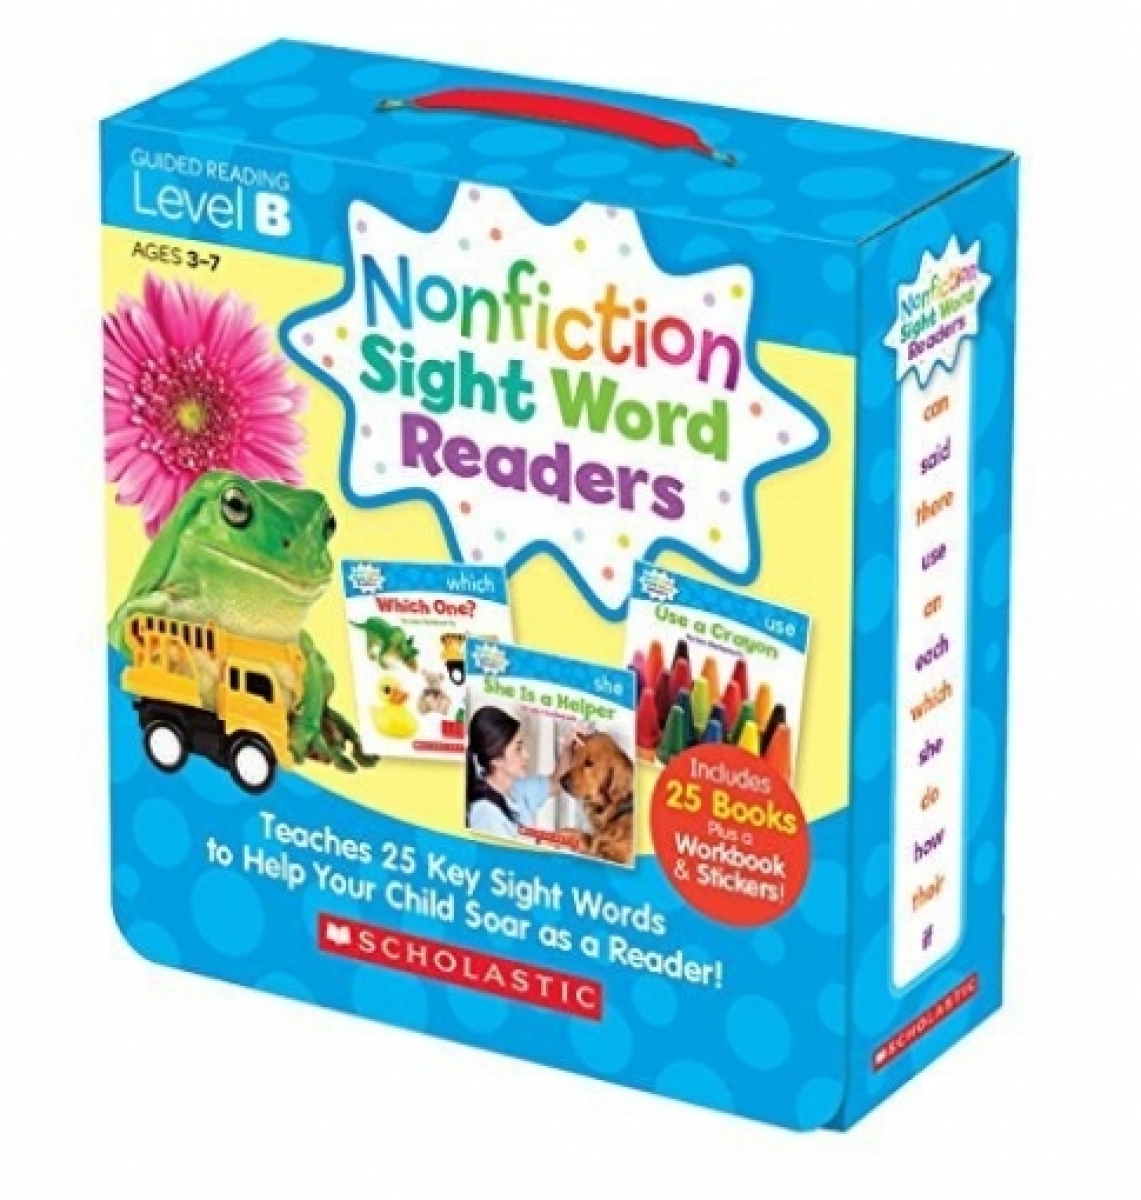 Charlesworth Liza Nonfiction Sight Word Readers. Parent Pack. Level B (25 books) 